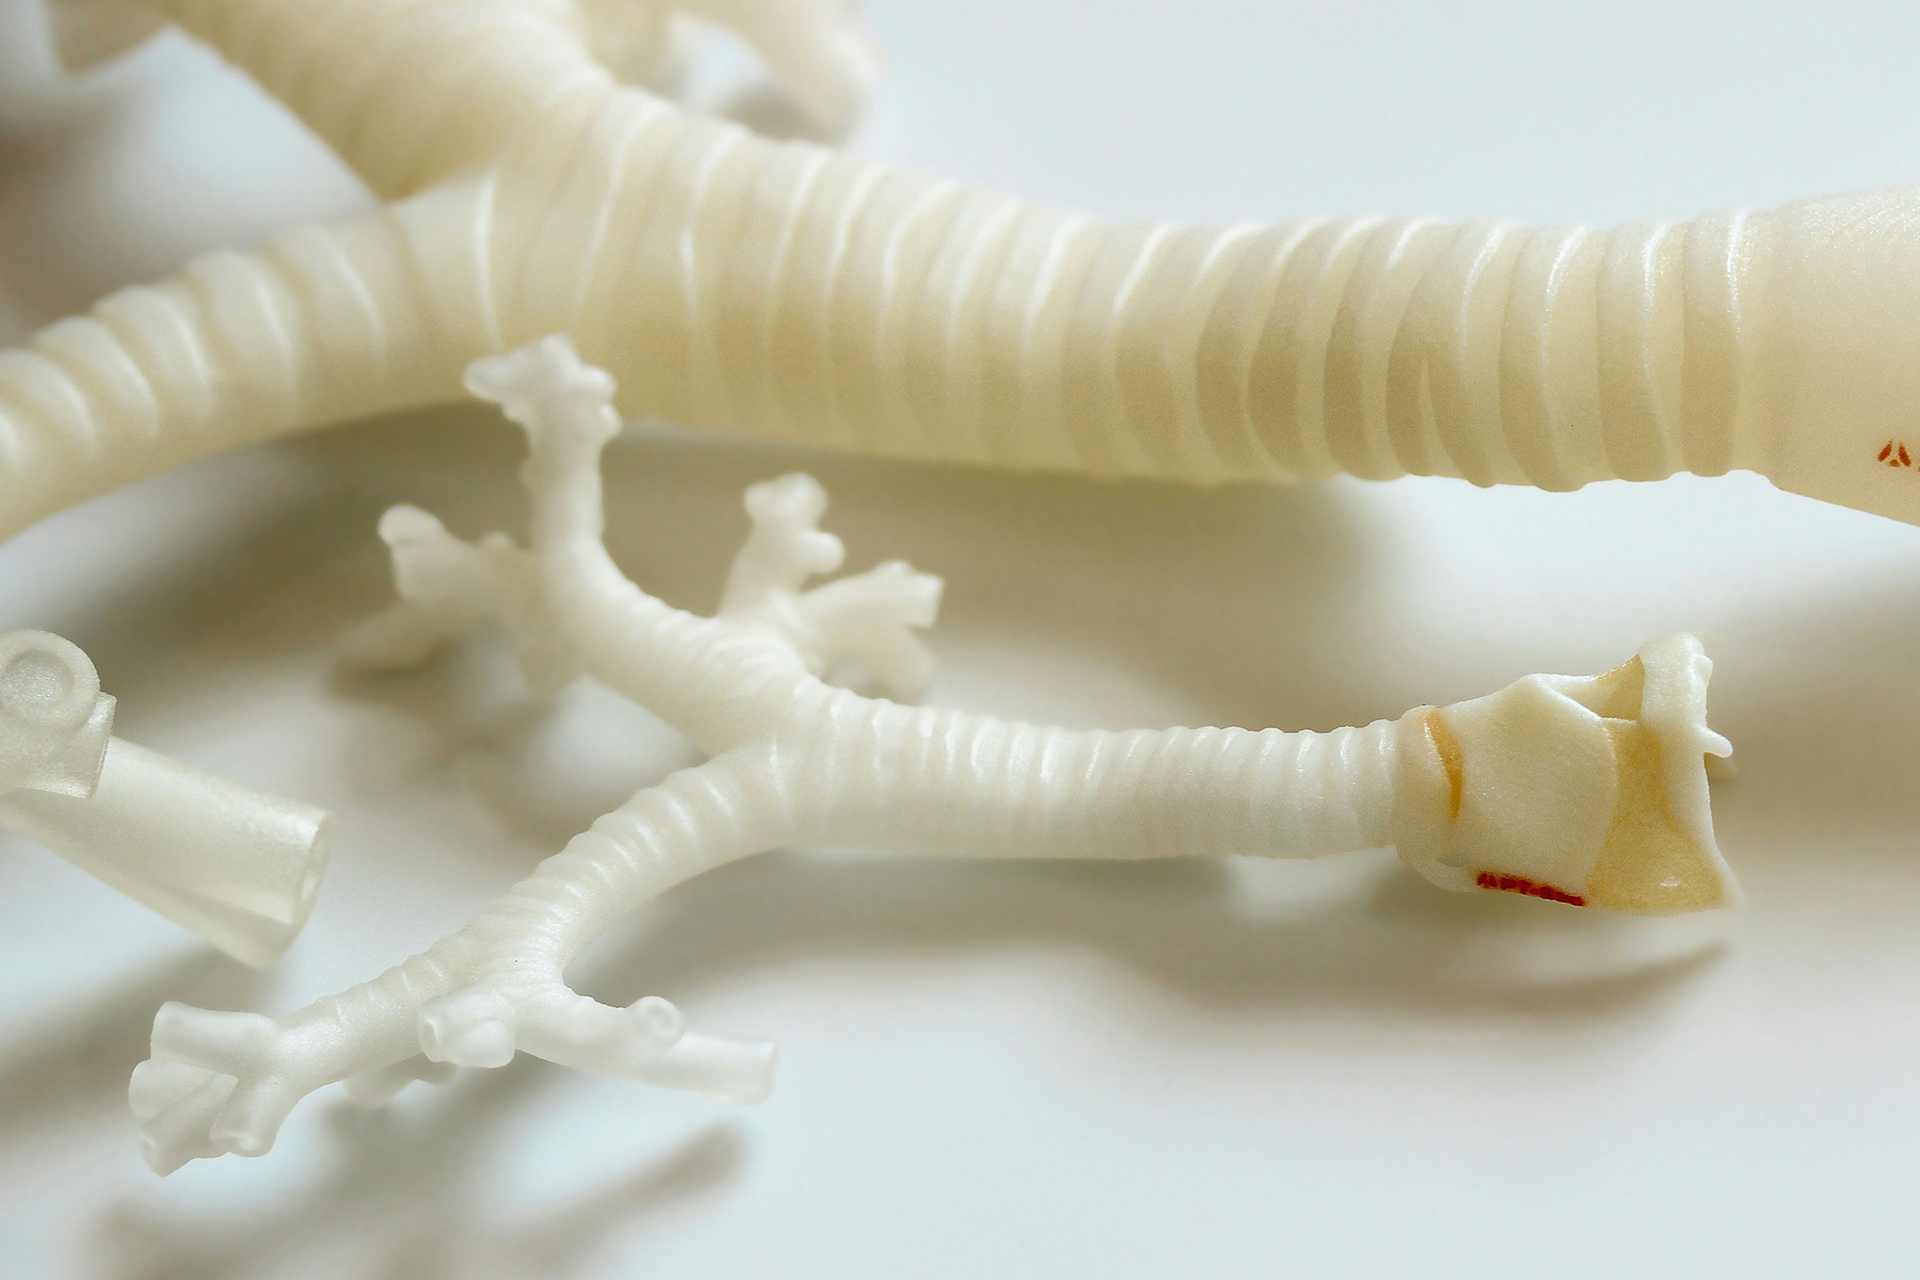 Paediatric trachea model sitting next to an adult version.